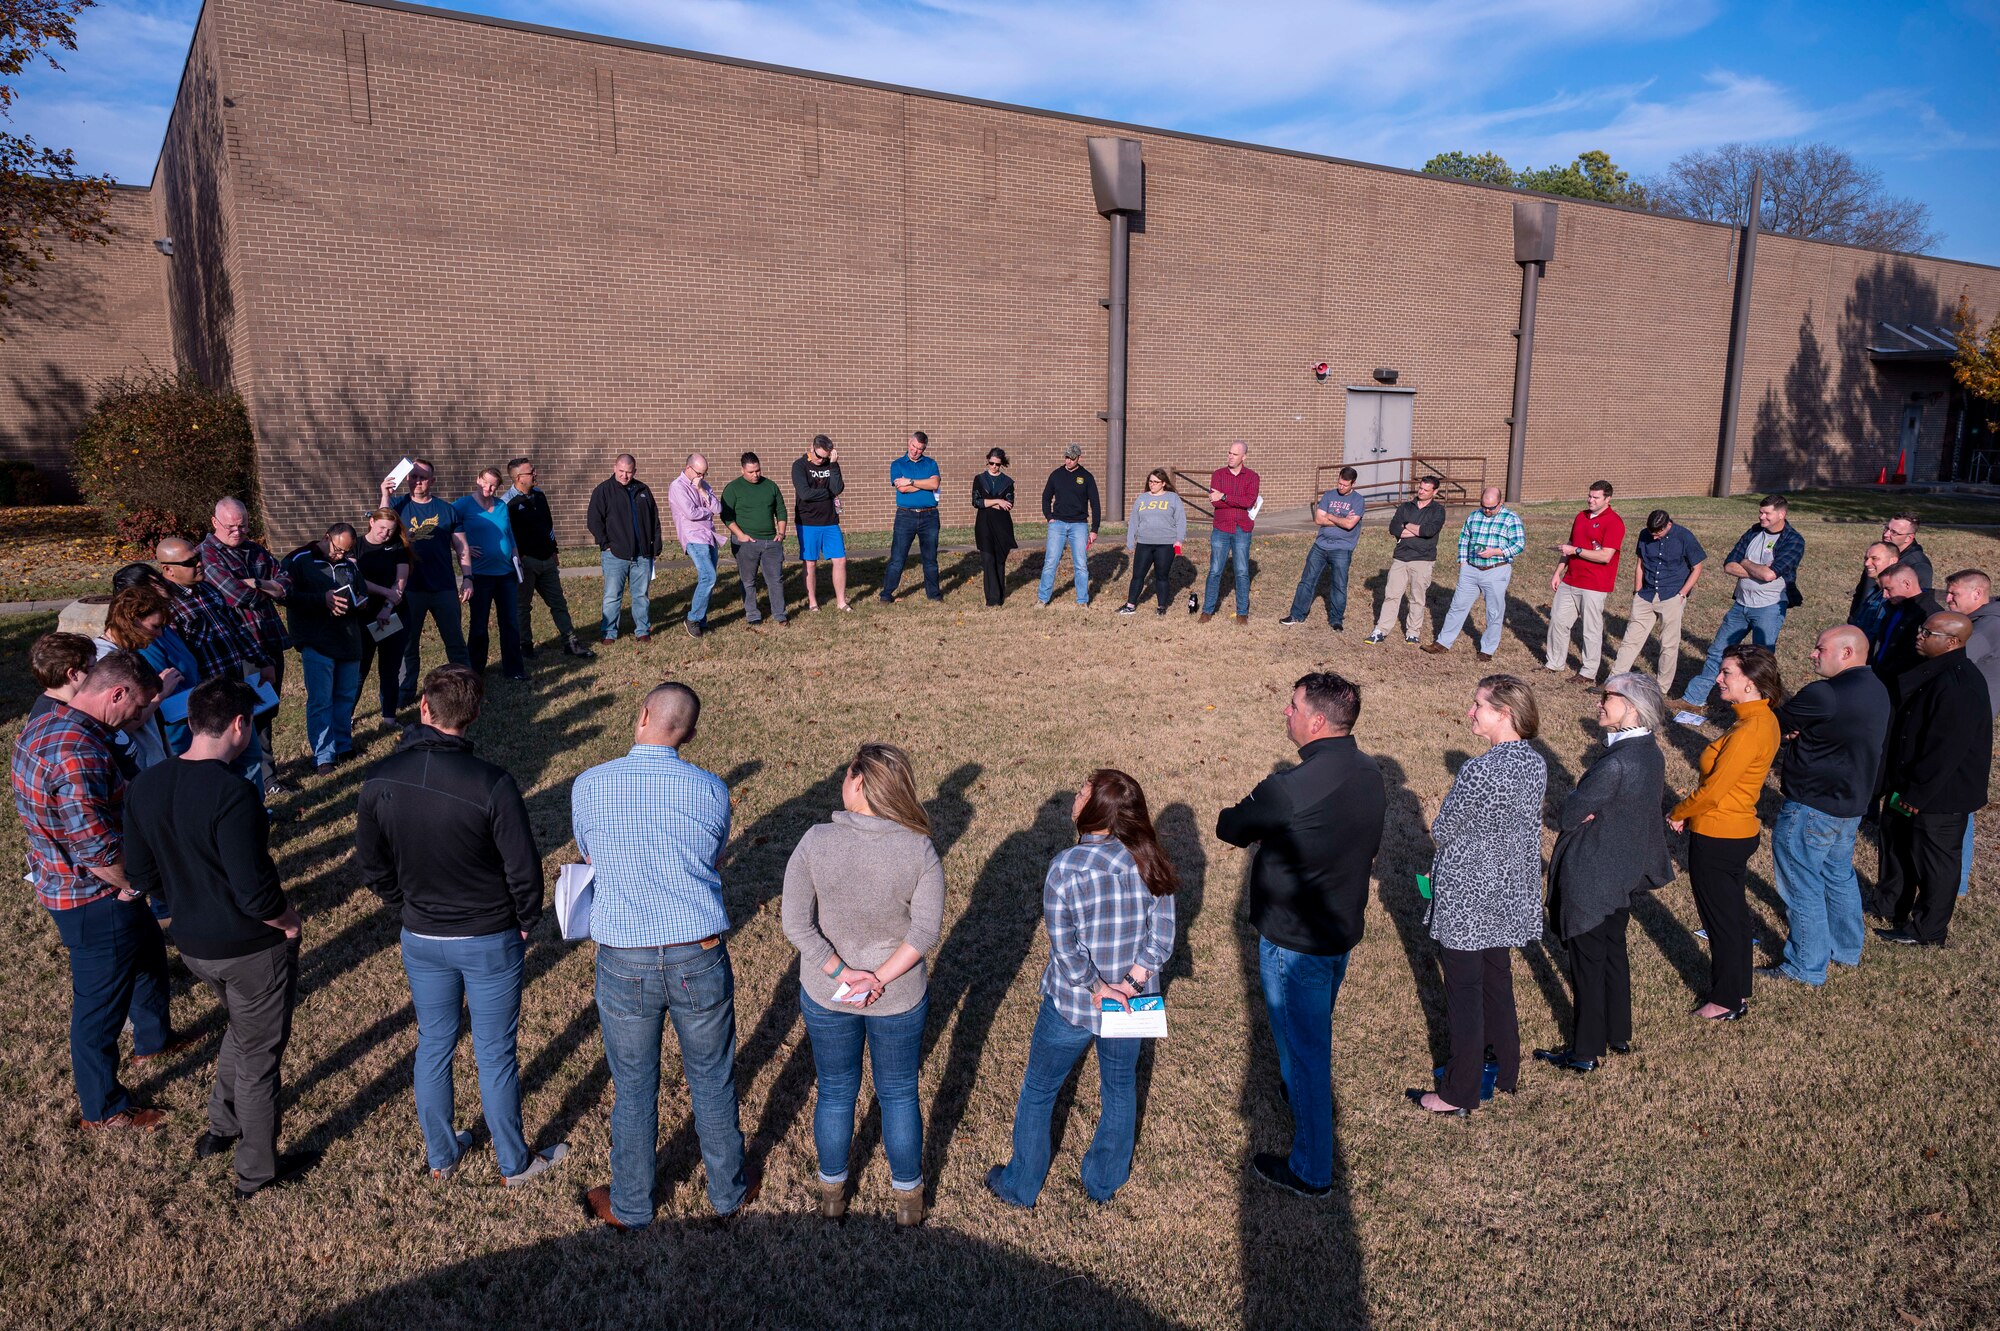 Airmen stand in a circle during a group activity.